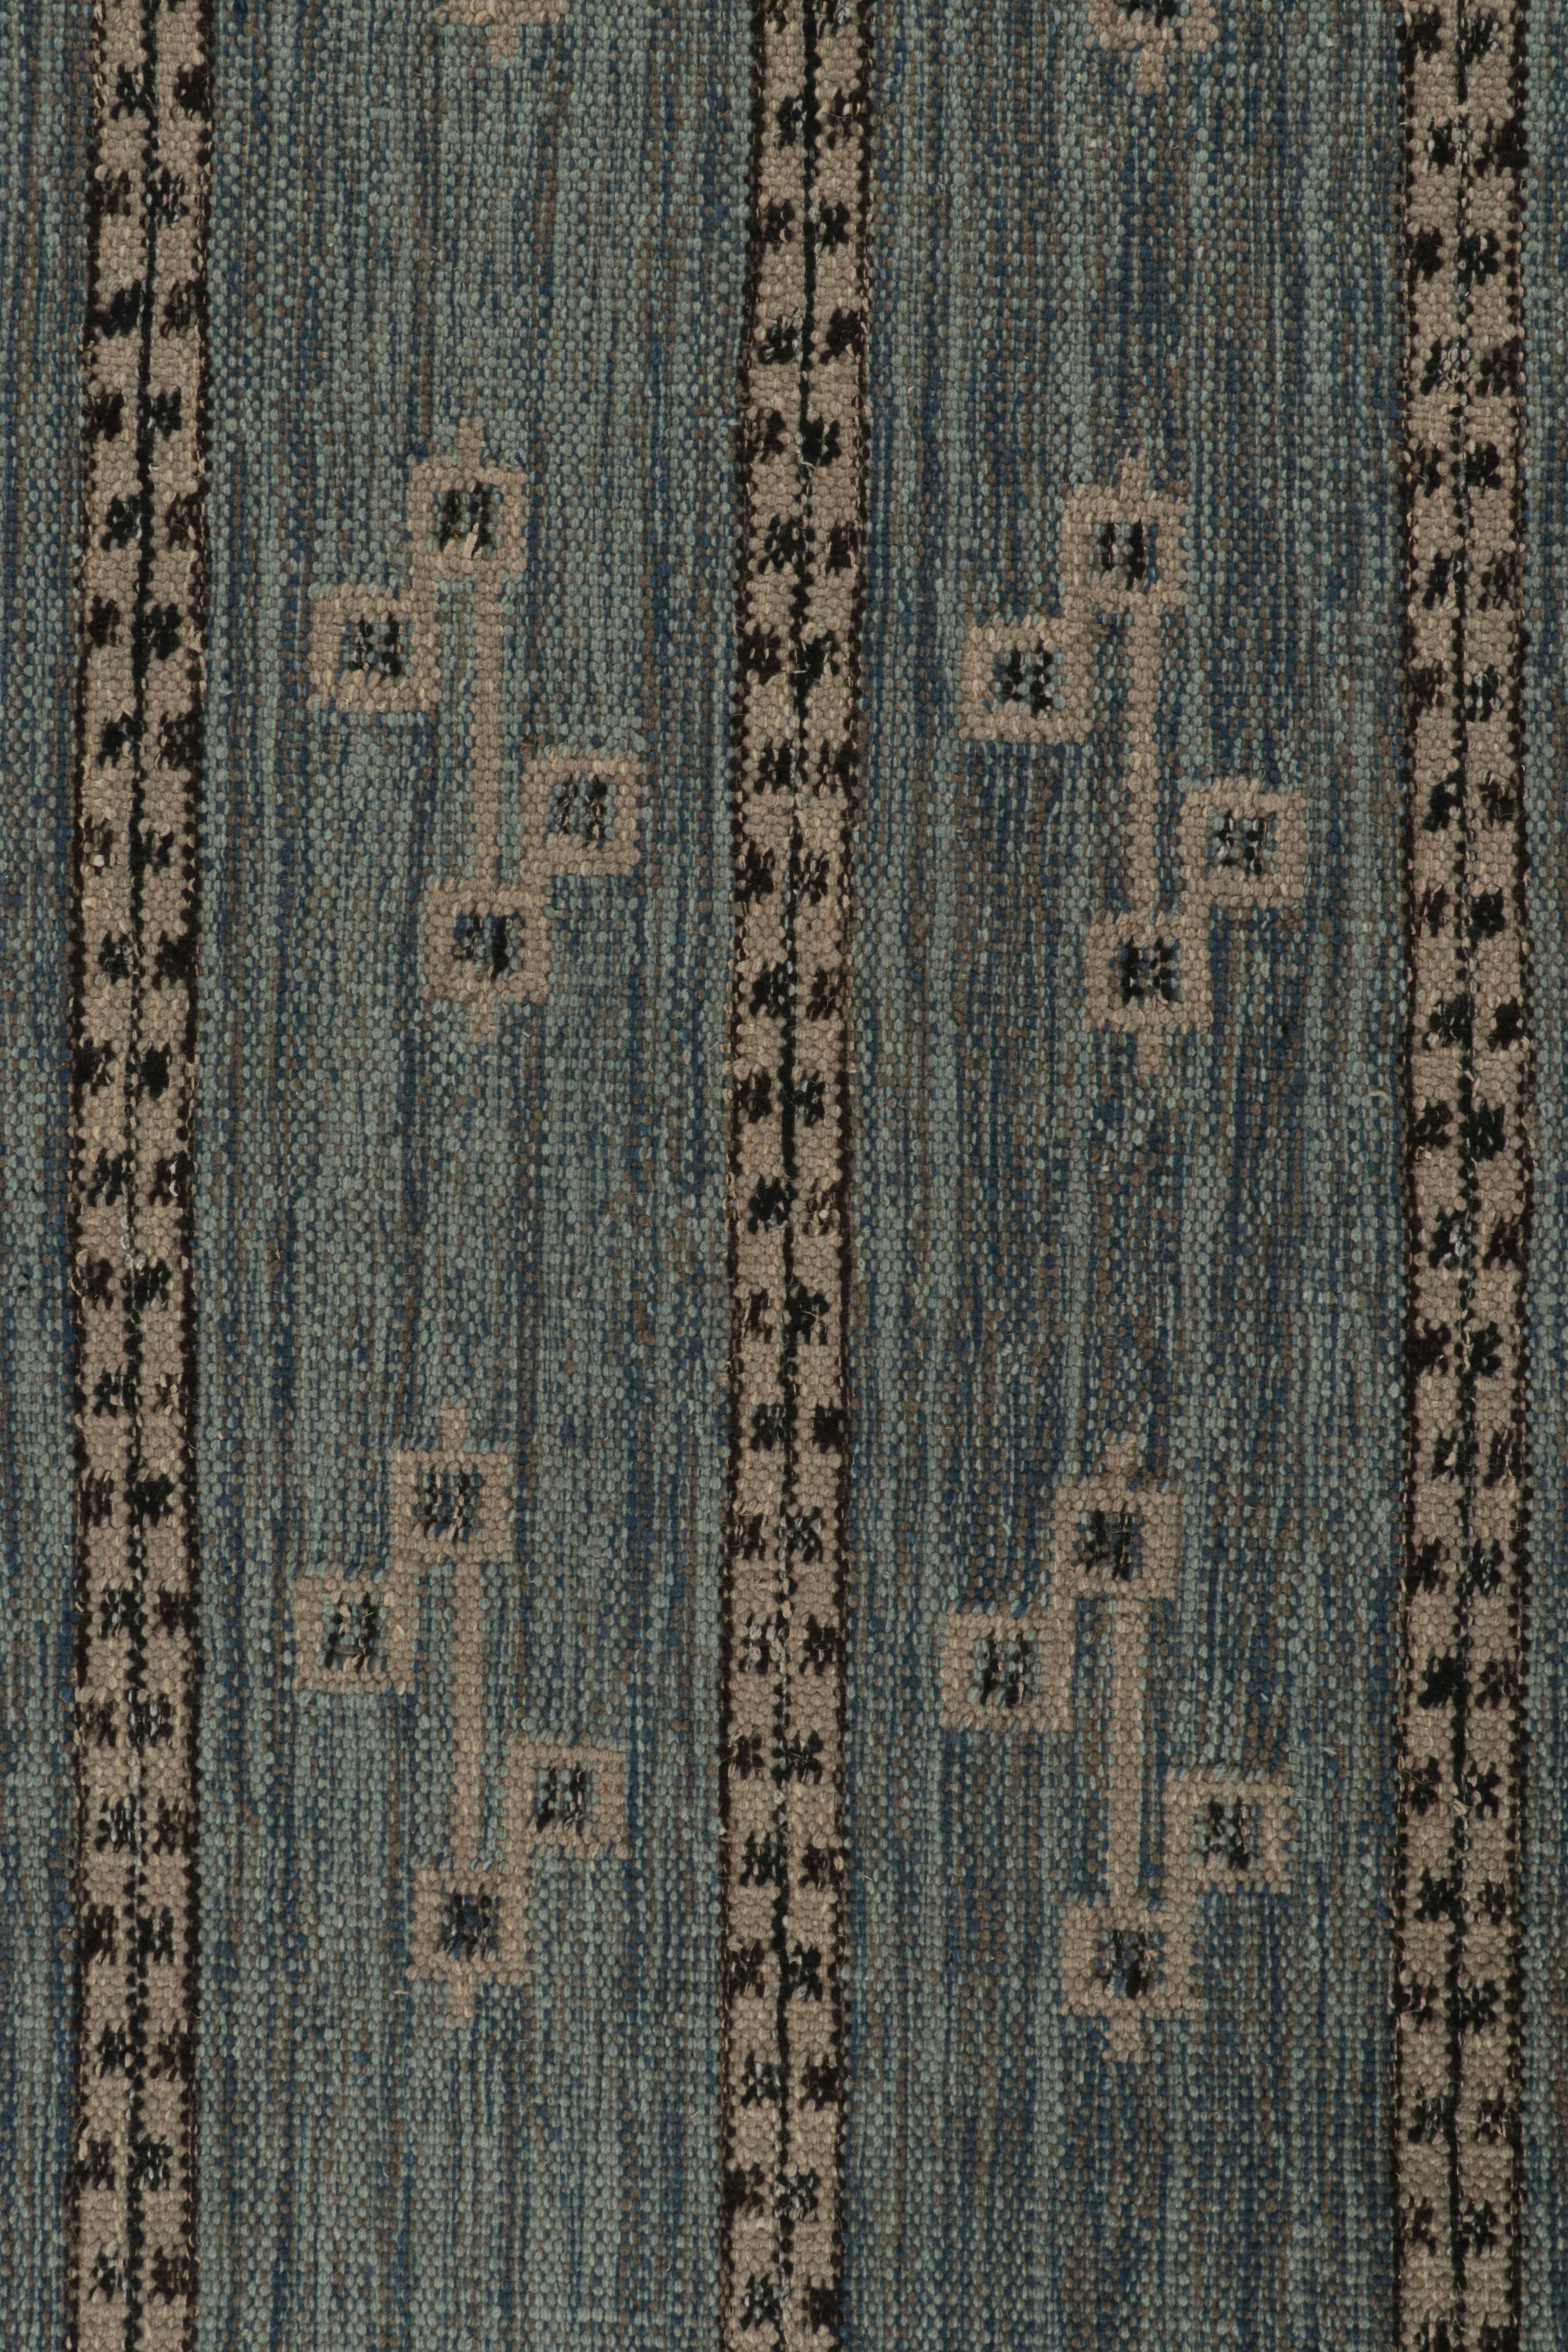 Rug & Kilim’s Scandinavian Style Kilim in Blue, Gray & Black Geometric Patterns In New Condition For Sale In Long Island City, NY